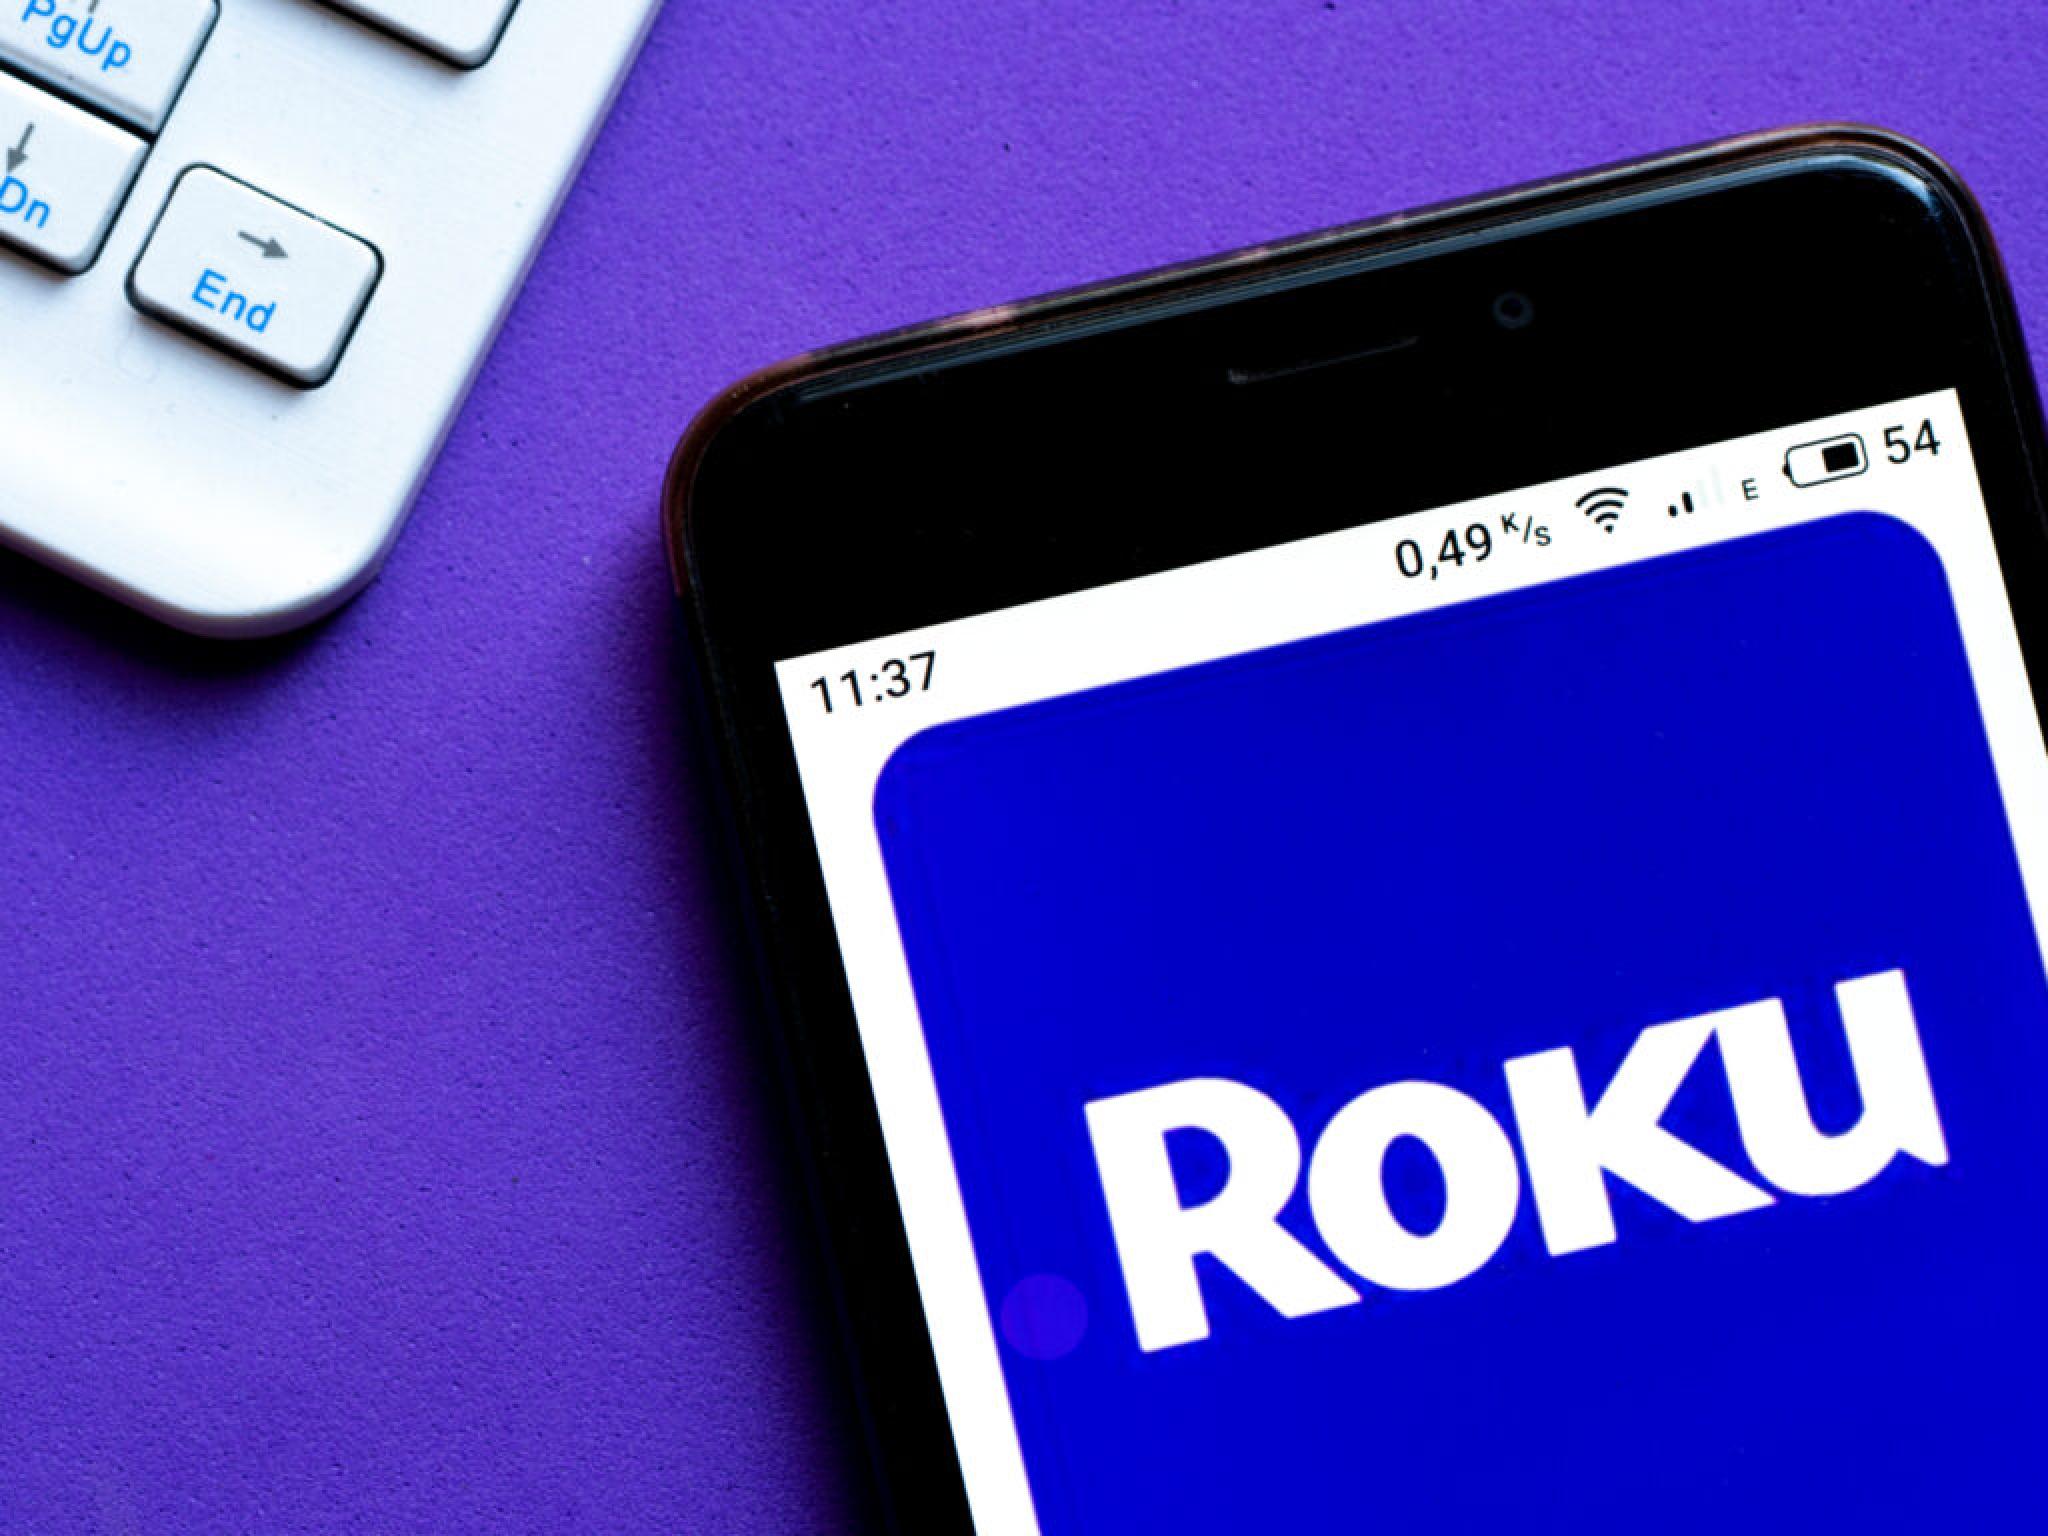  roku-exceeds-q1-earnings-expectations-provides-upbeat-guidance 